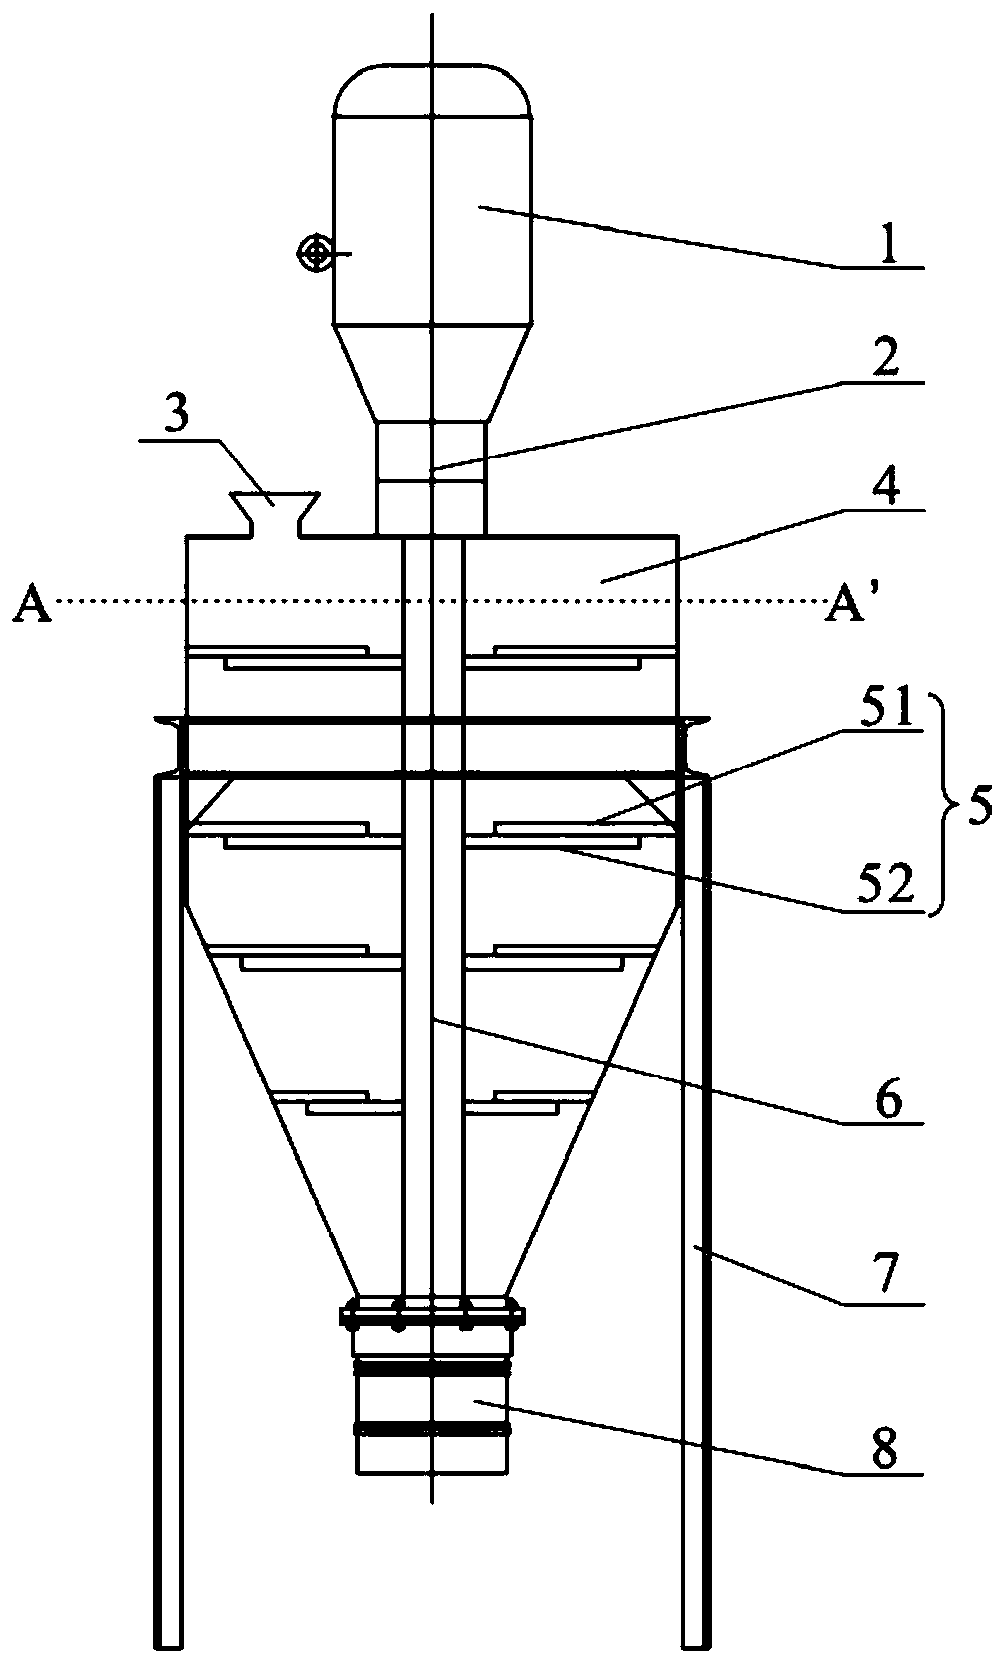 A cement cracking device and concrete production system